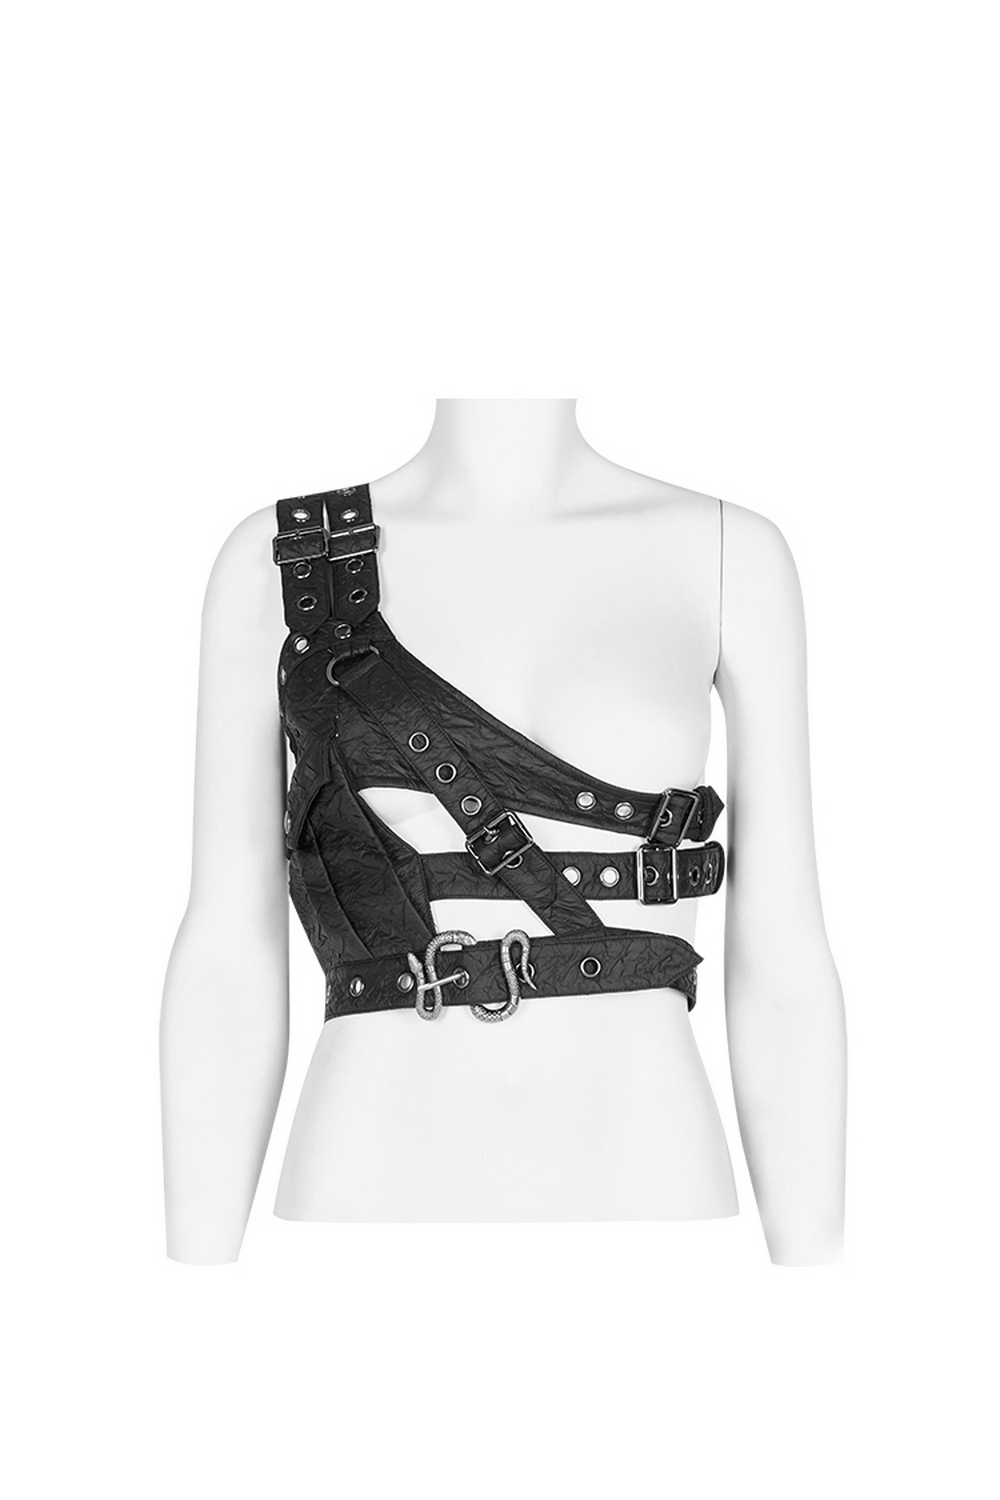 Punk Leather Shoulder Body Harness with Metal Accents